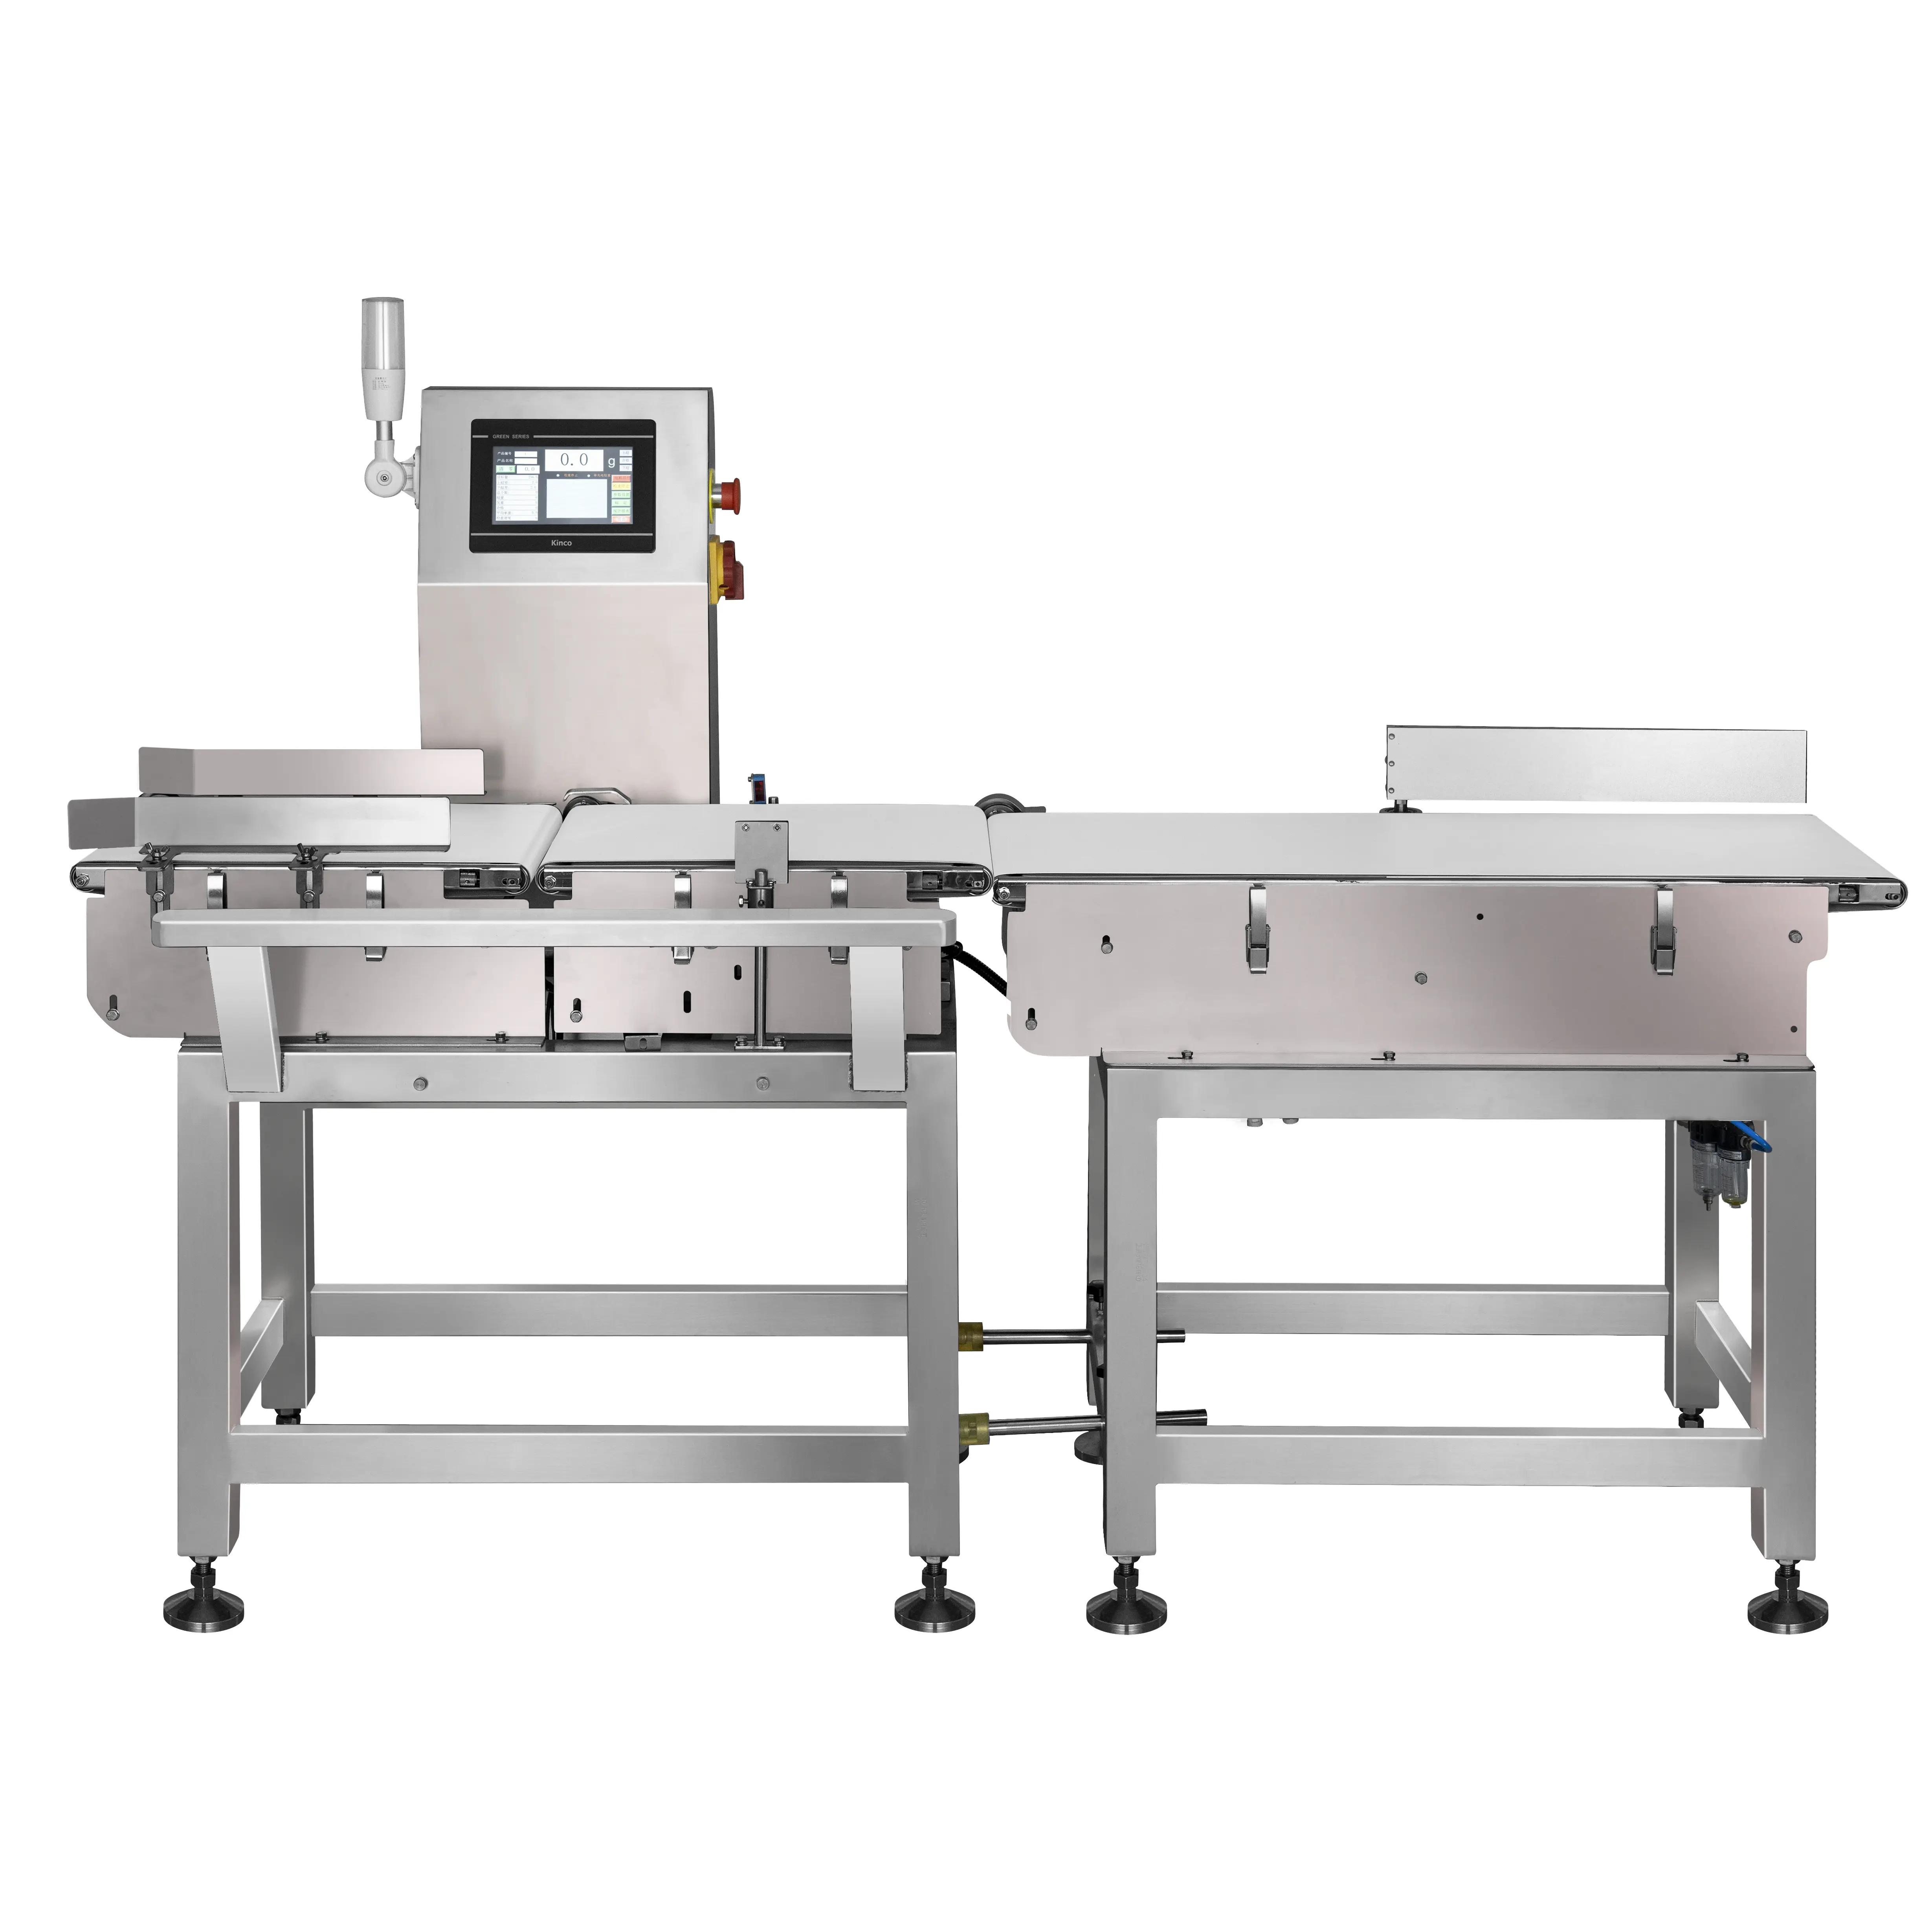 Top sale standard automatic check scale industrial precise weighing machine